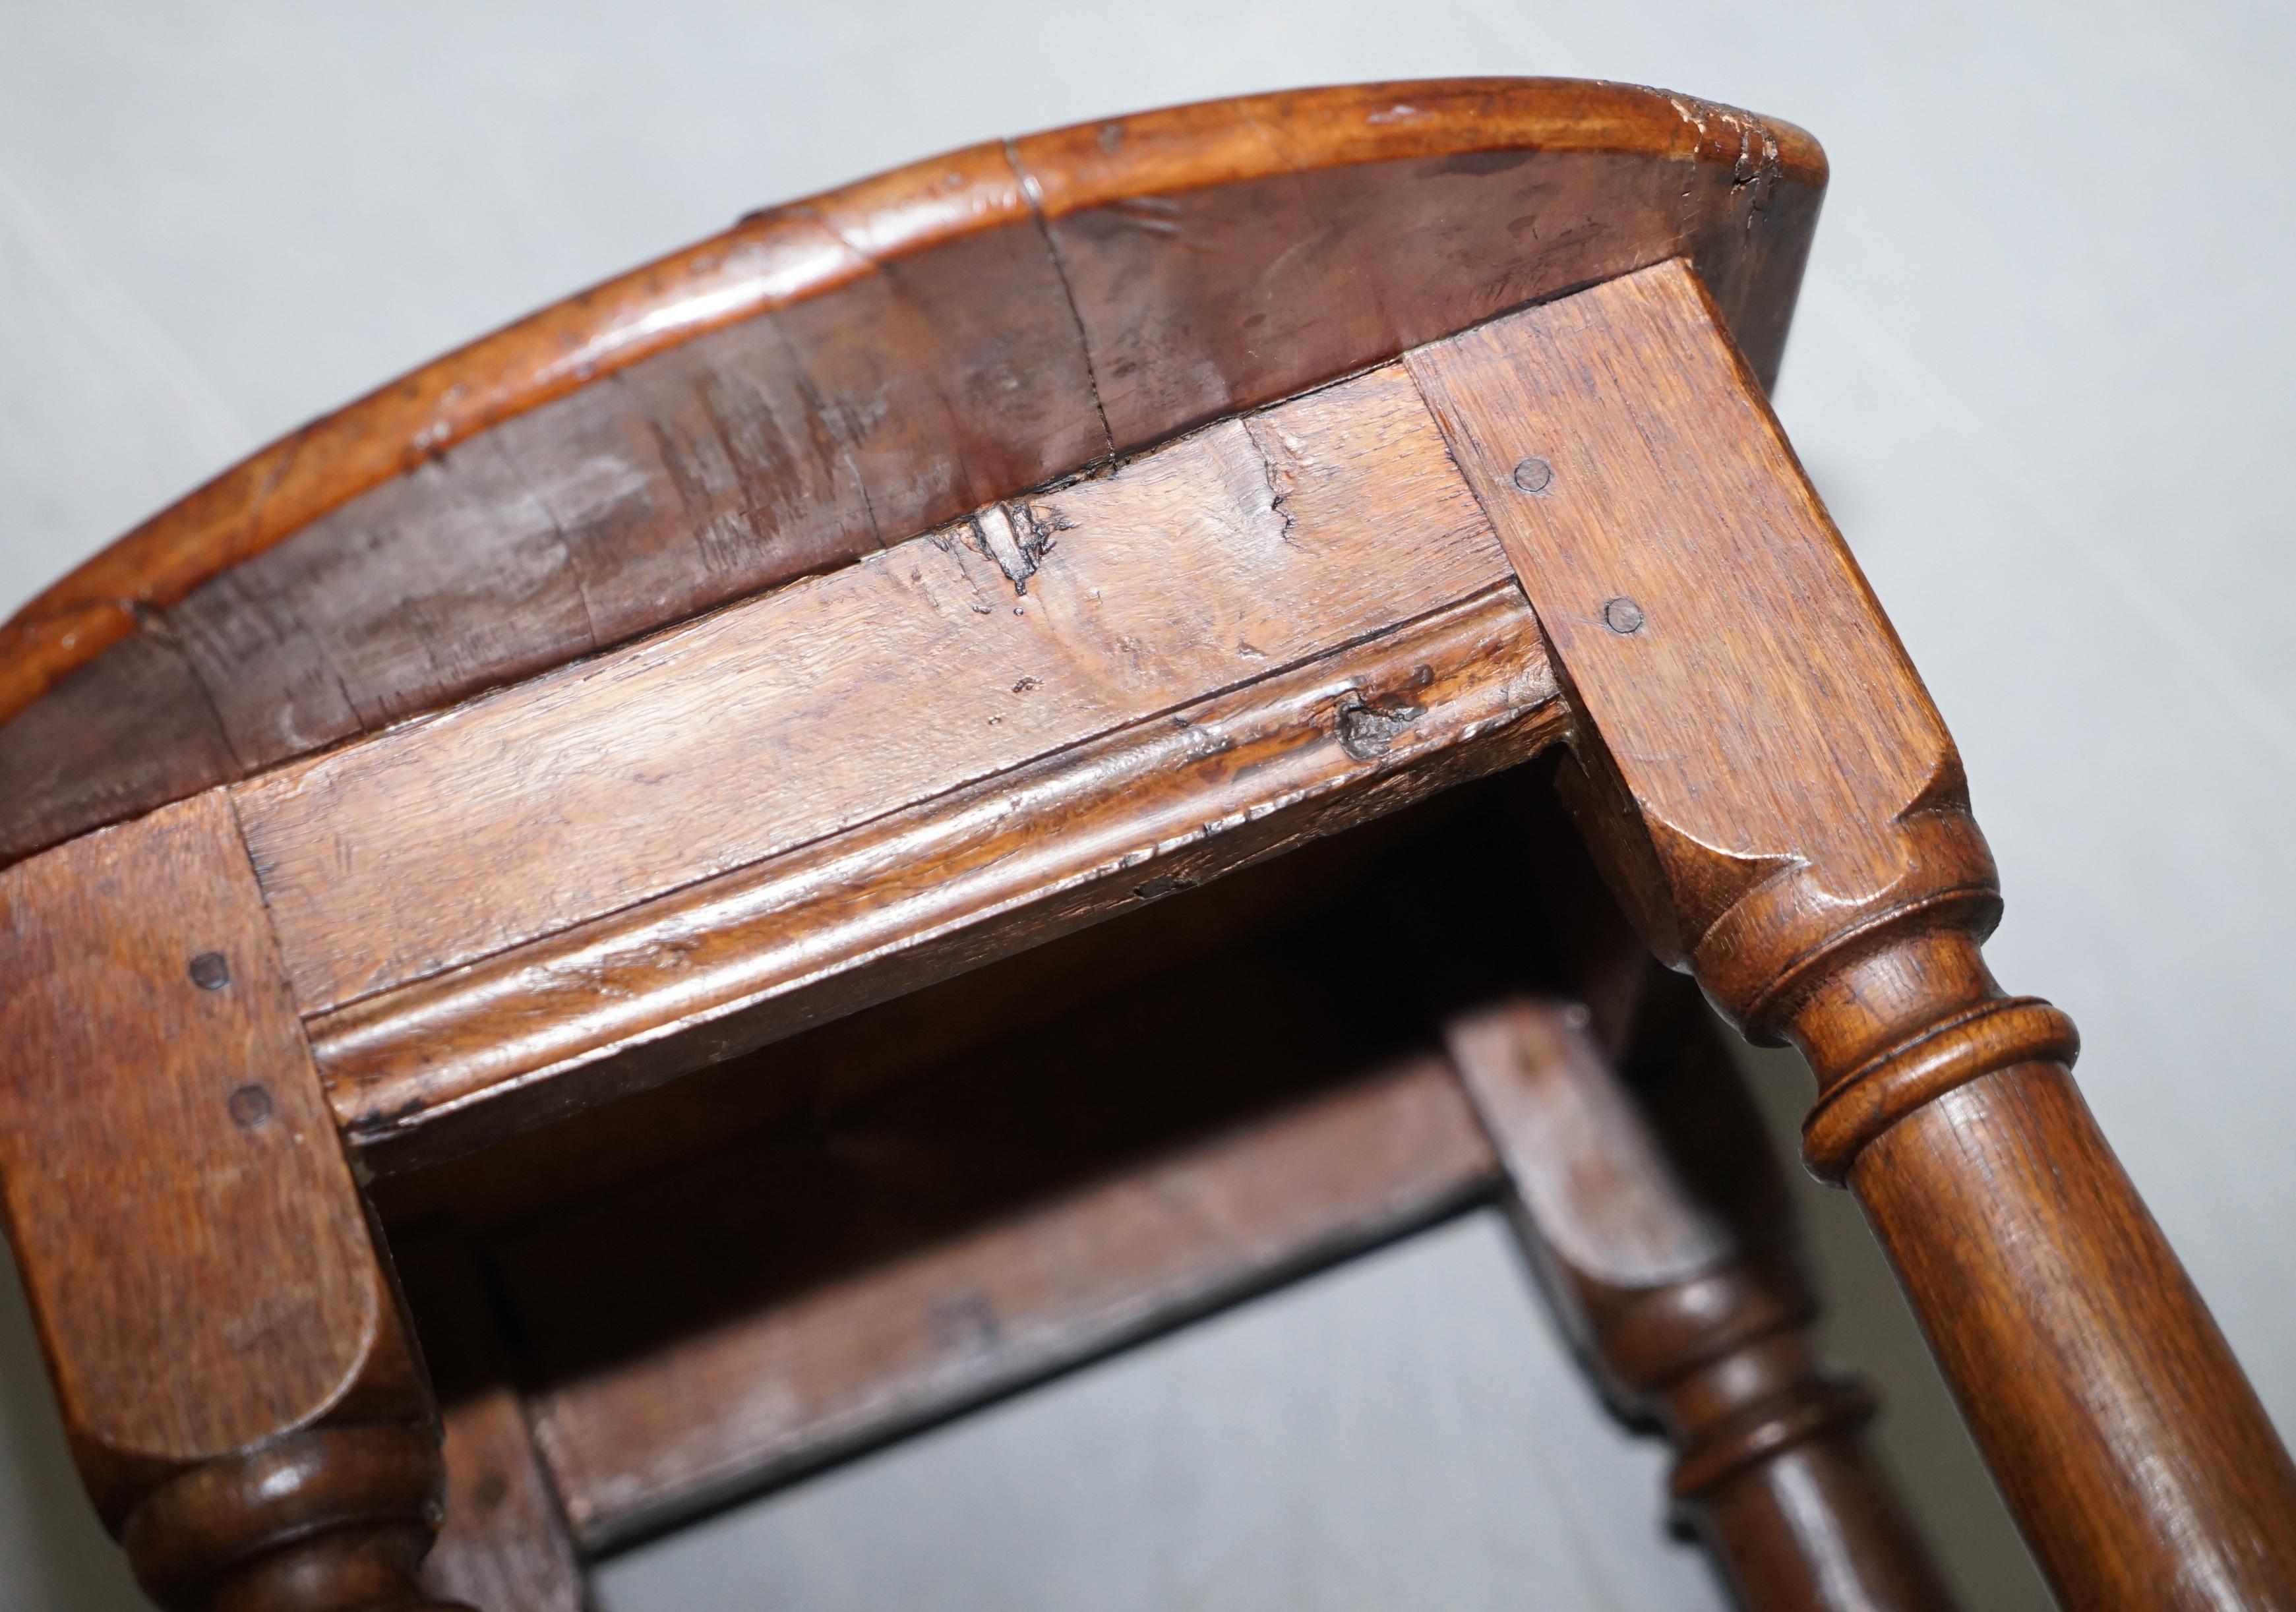 Lovely 18th Century Dutch Stool with Handle Cut Out in the Top Bar Pub Study 11